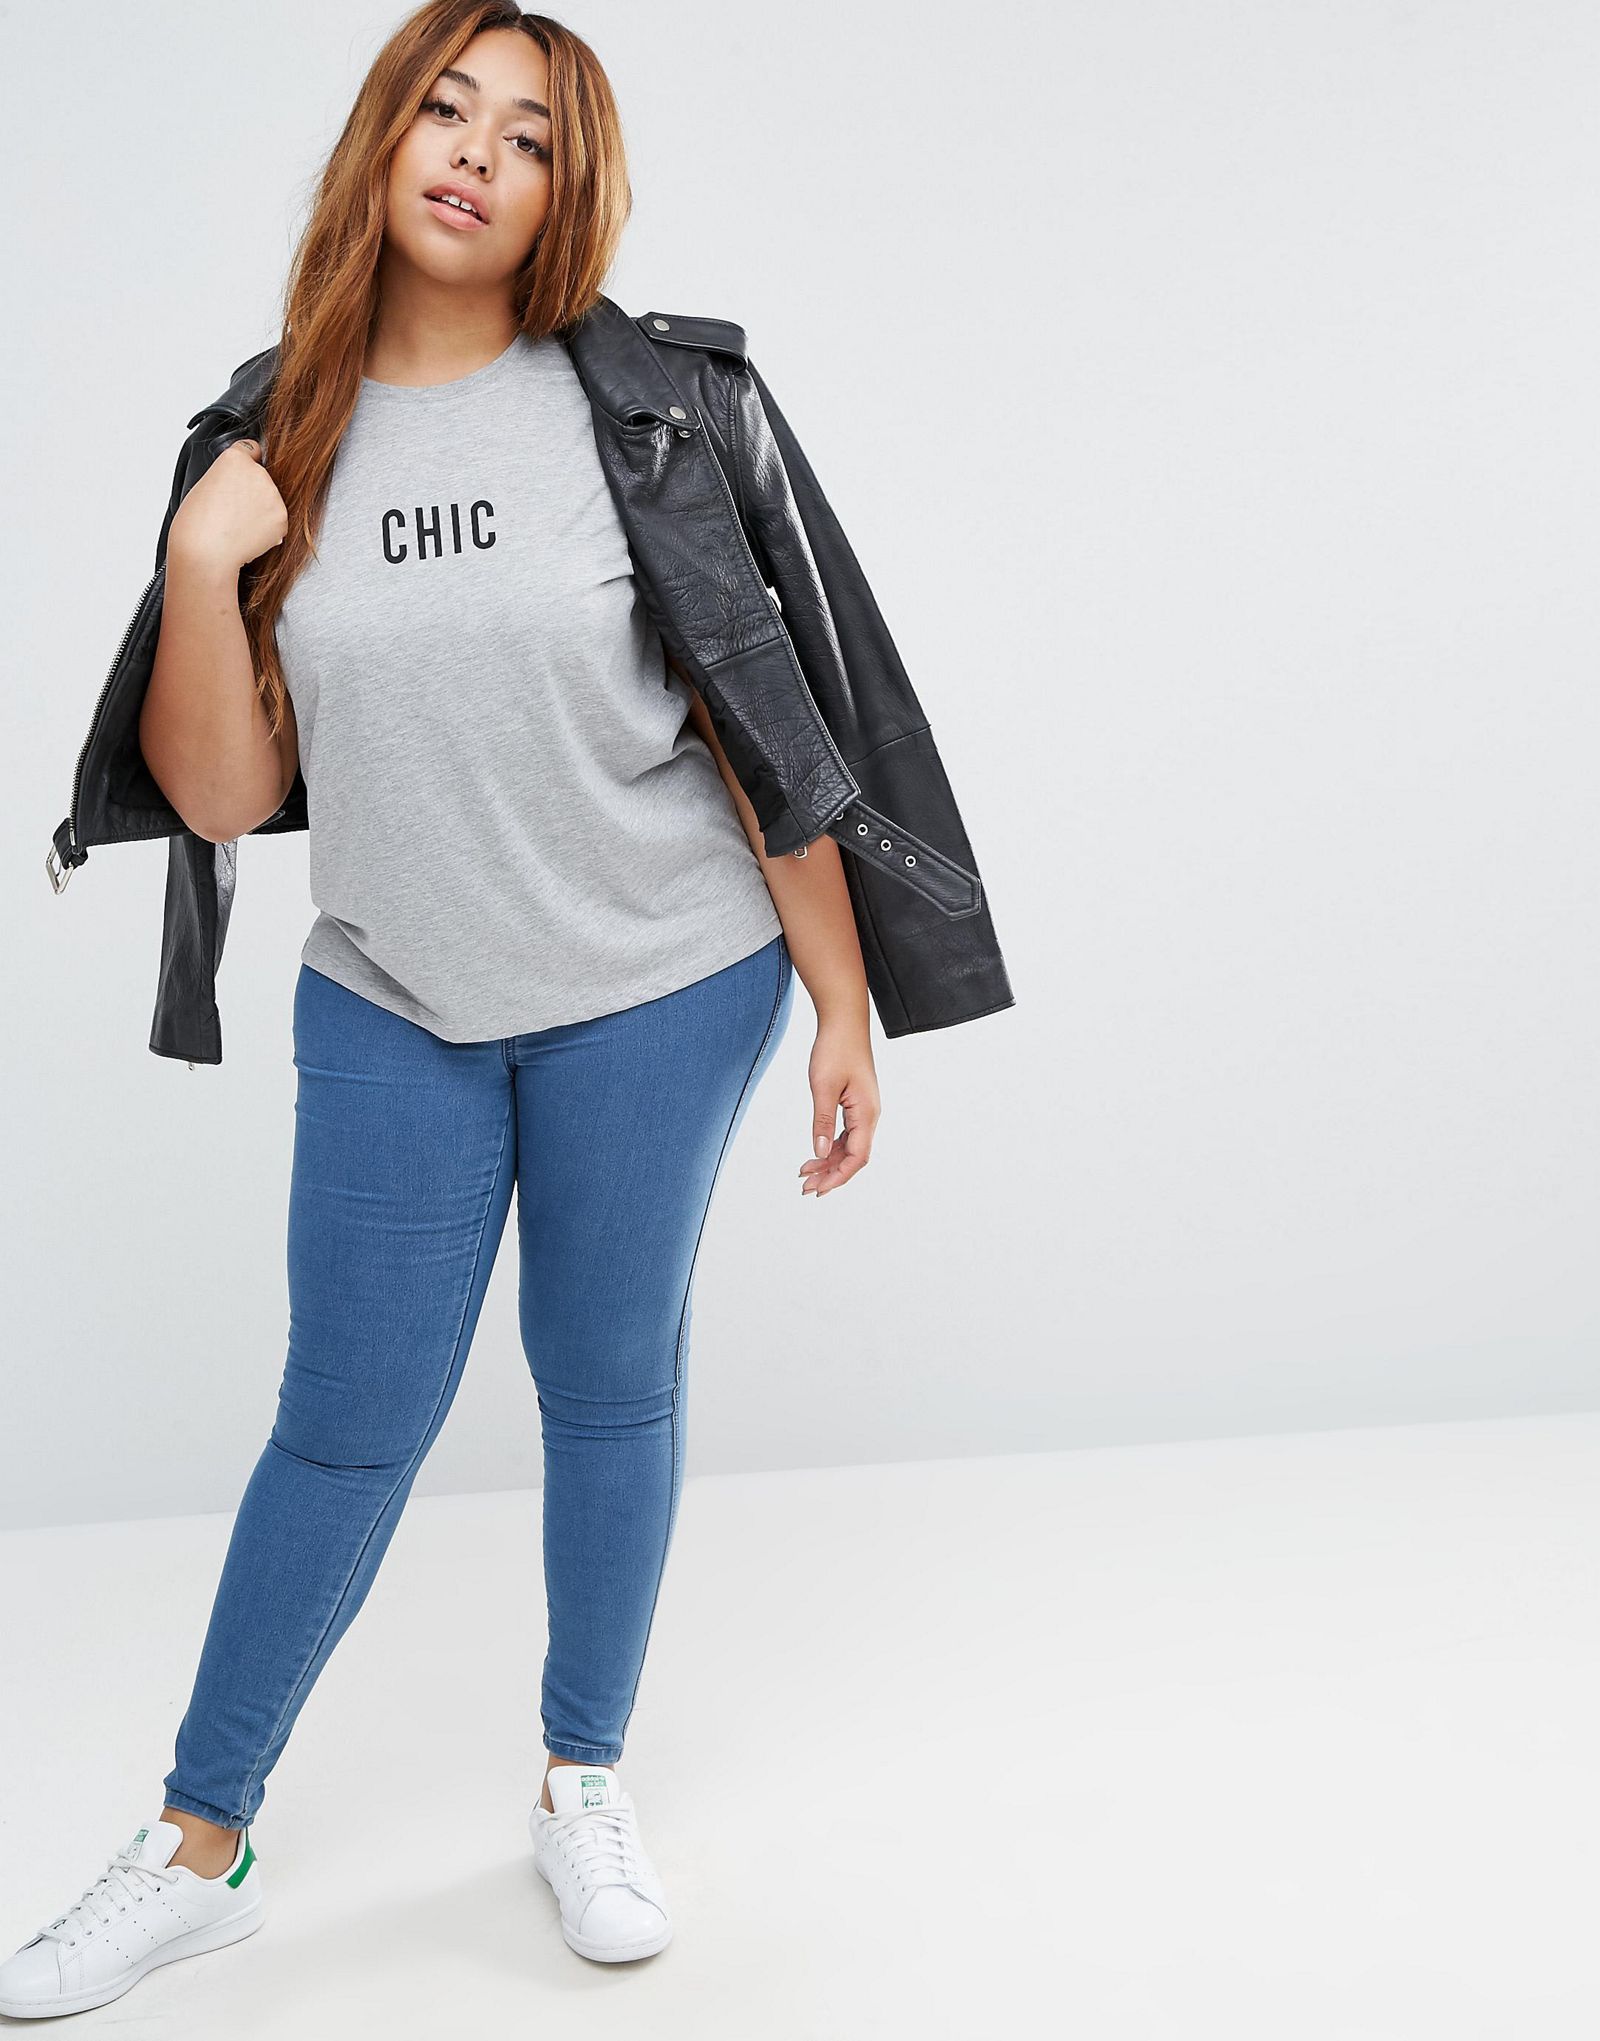 ASOS CURVE T-Shirt with CHIC Print